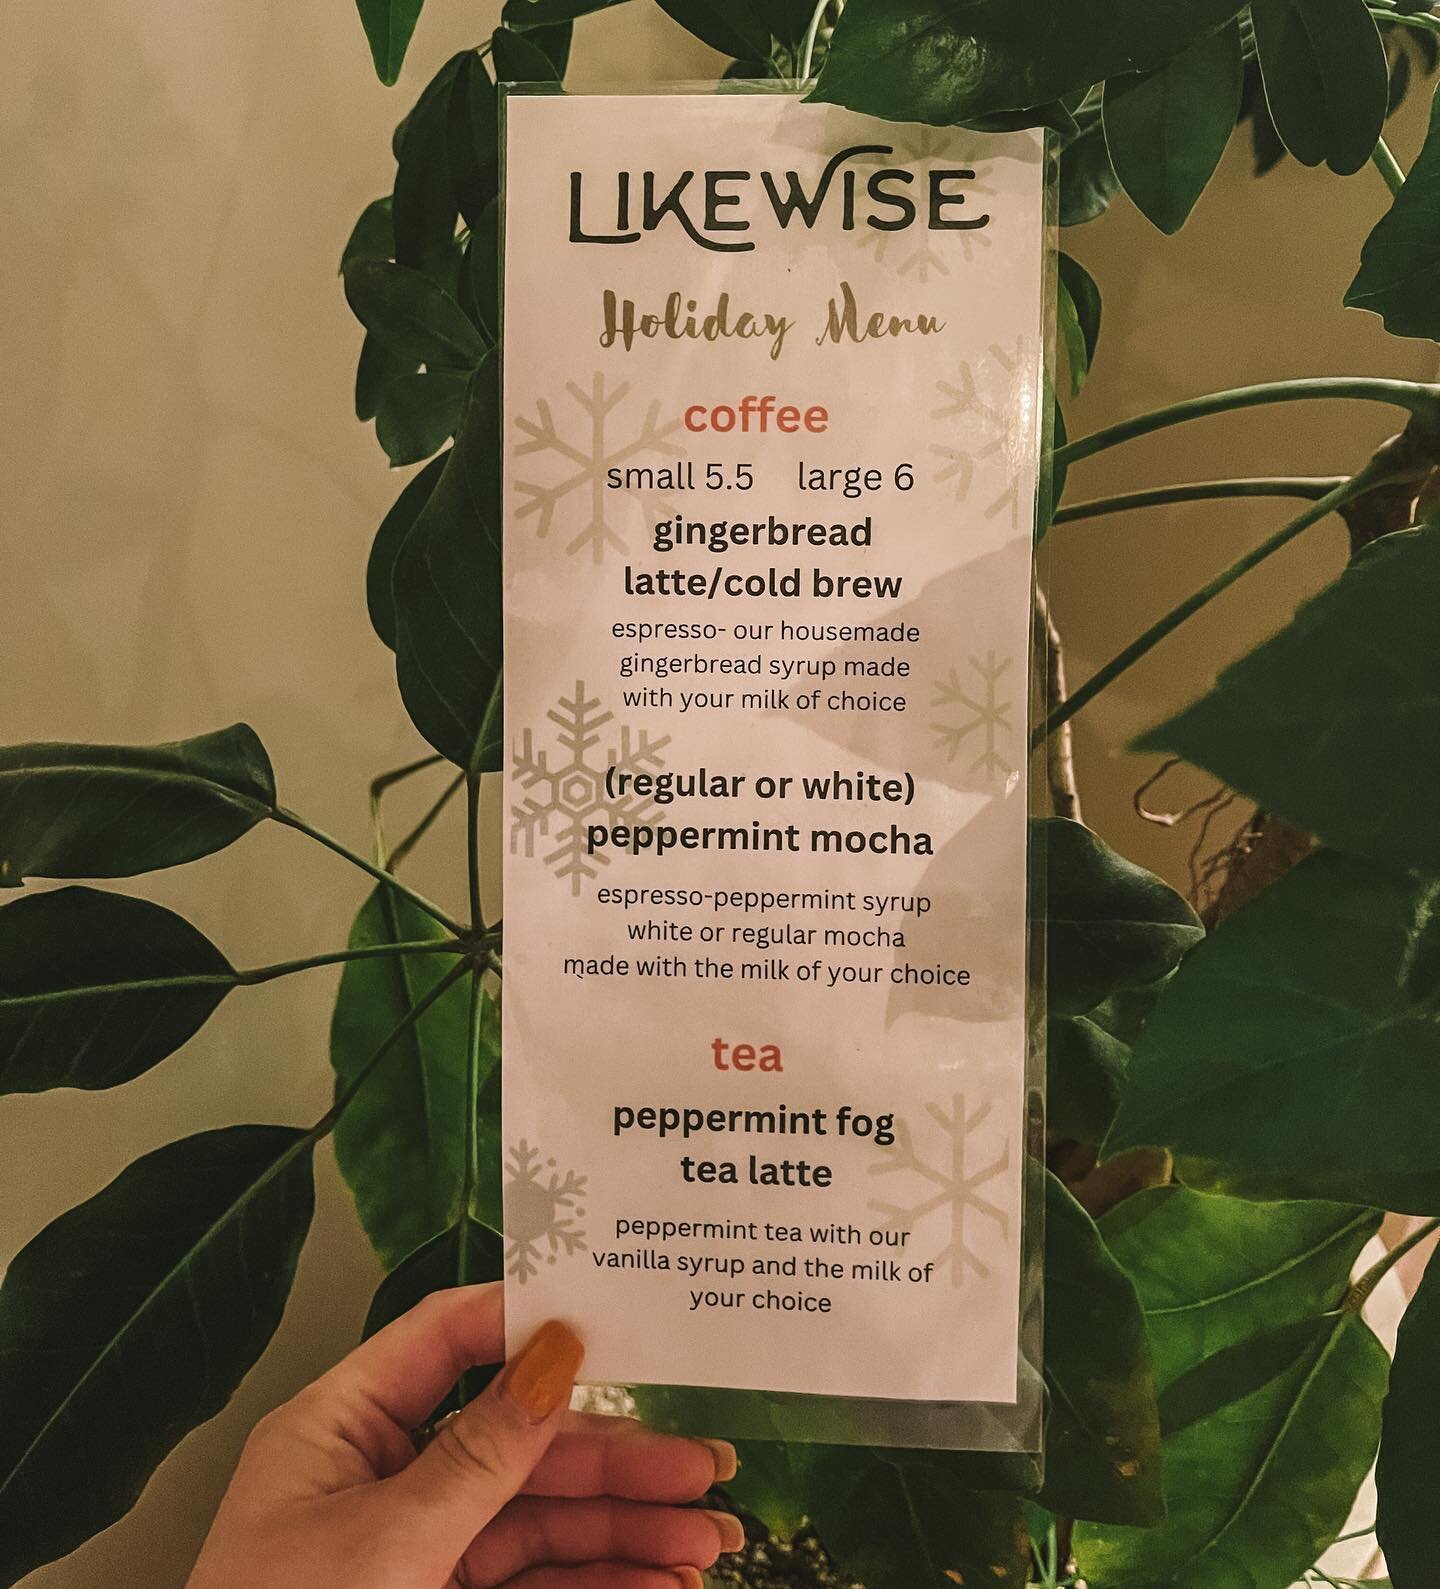 A NEW month calls for a NEW holiday menu!!!!! 🤩 Which drink are you most excited for?

#865 #likewise #likewisecoffee #likewiseroastery #shoplocalknox #shoplocalknoxville #peppermintmocha #gingerbread #gingerbreadlatte